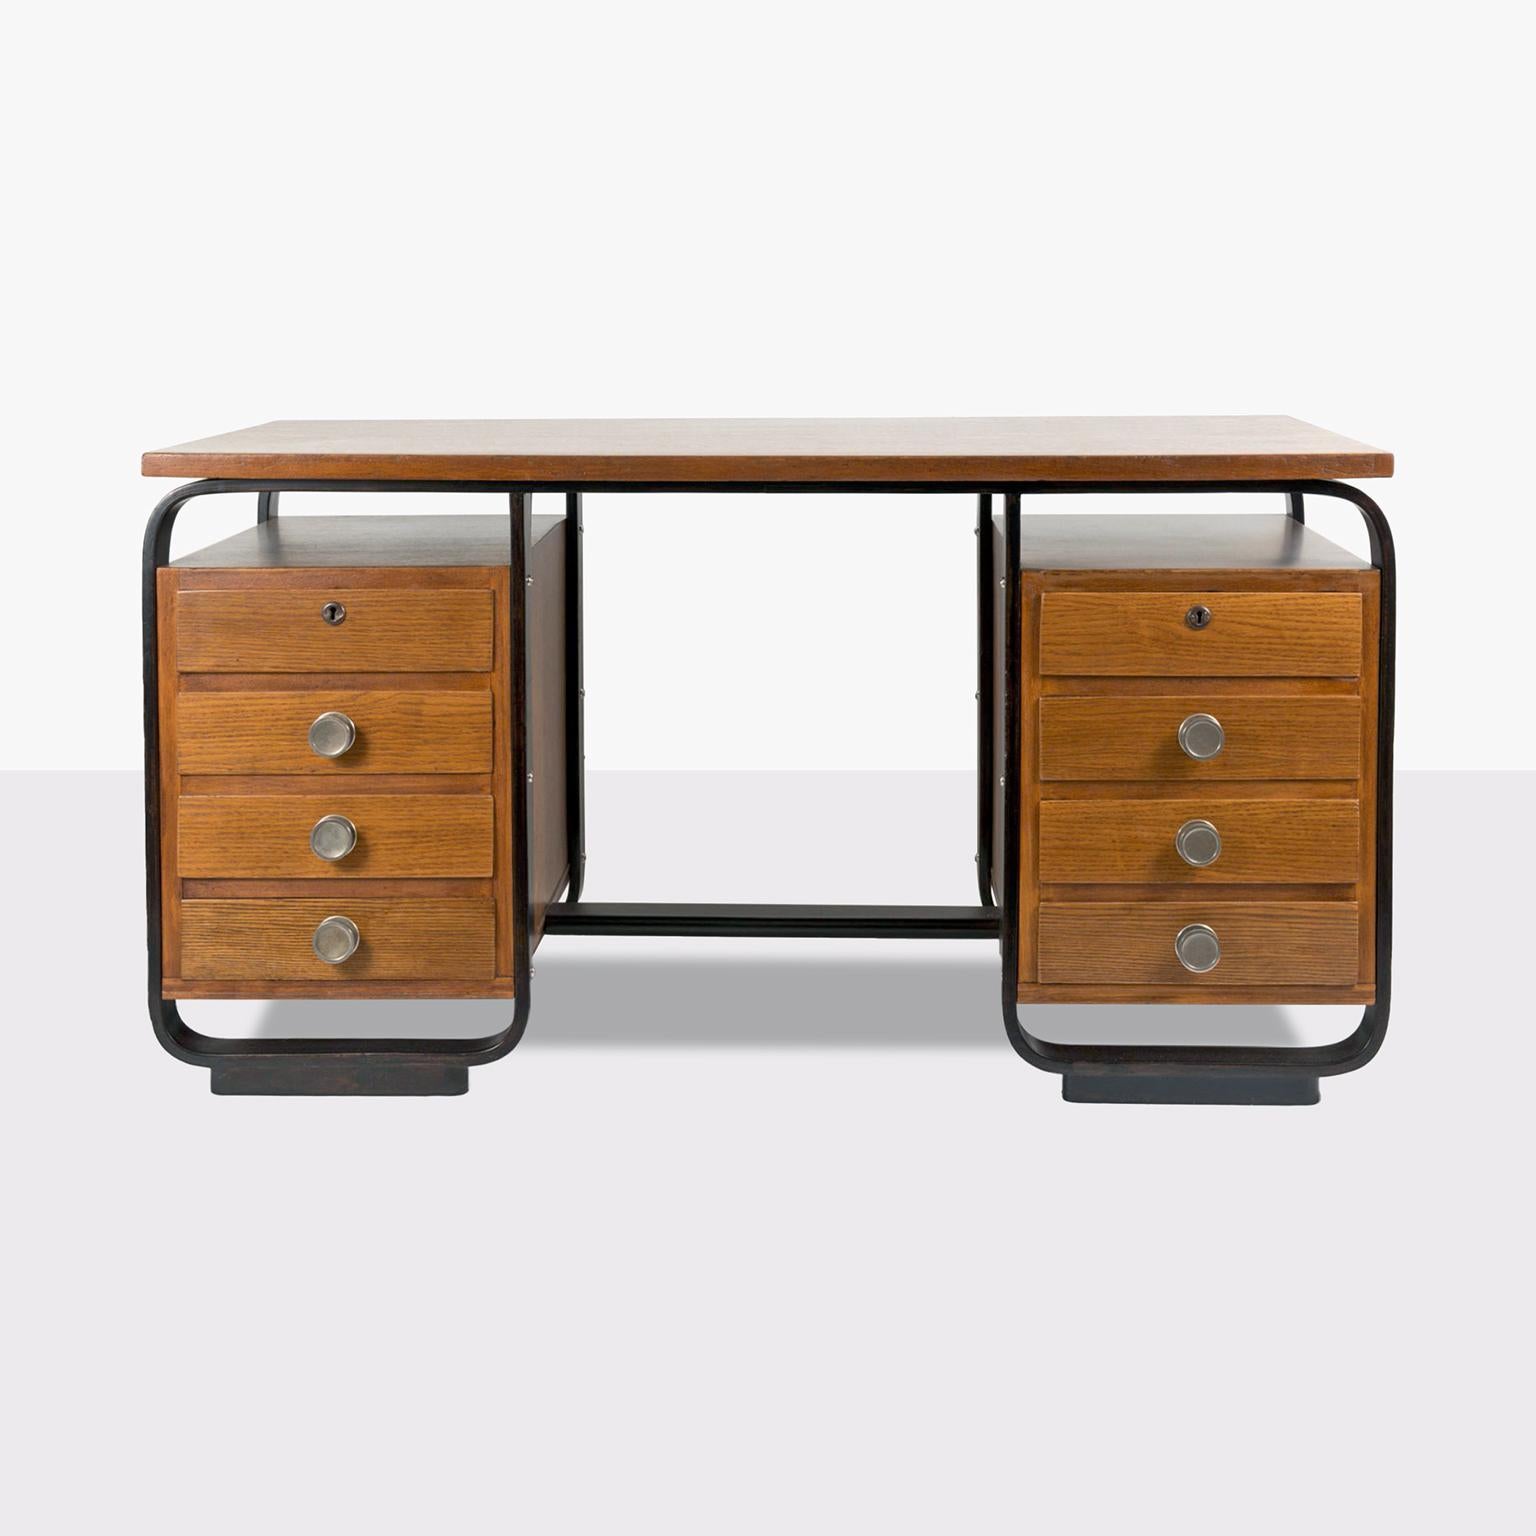 Modern Rationalist Desk by Giuseppe Pagano for Maggioni, Veneered Wood, Italy, c. 1940 For Sale